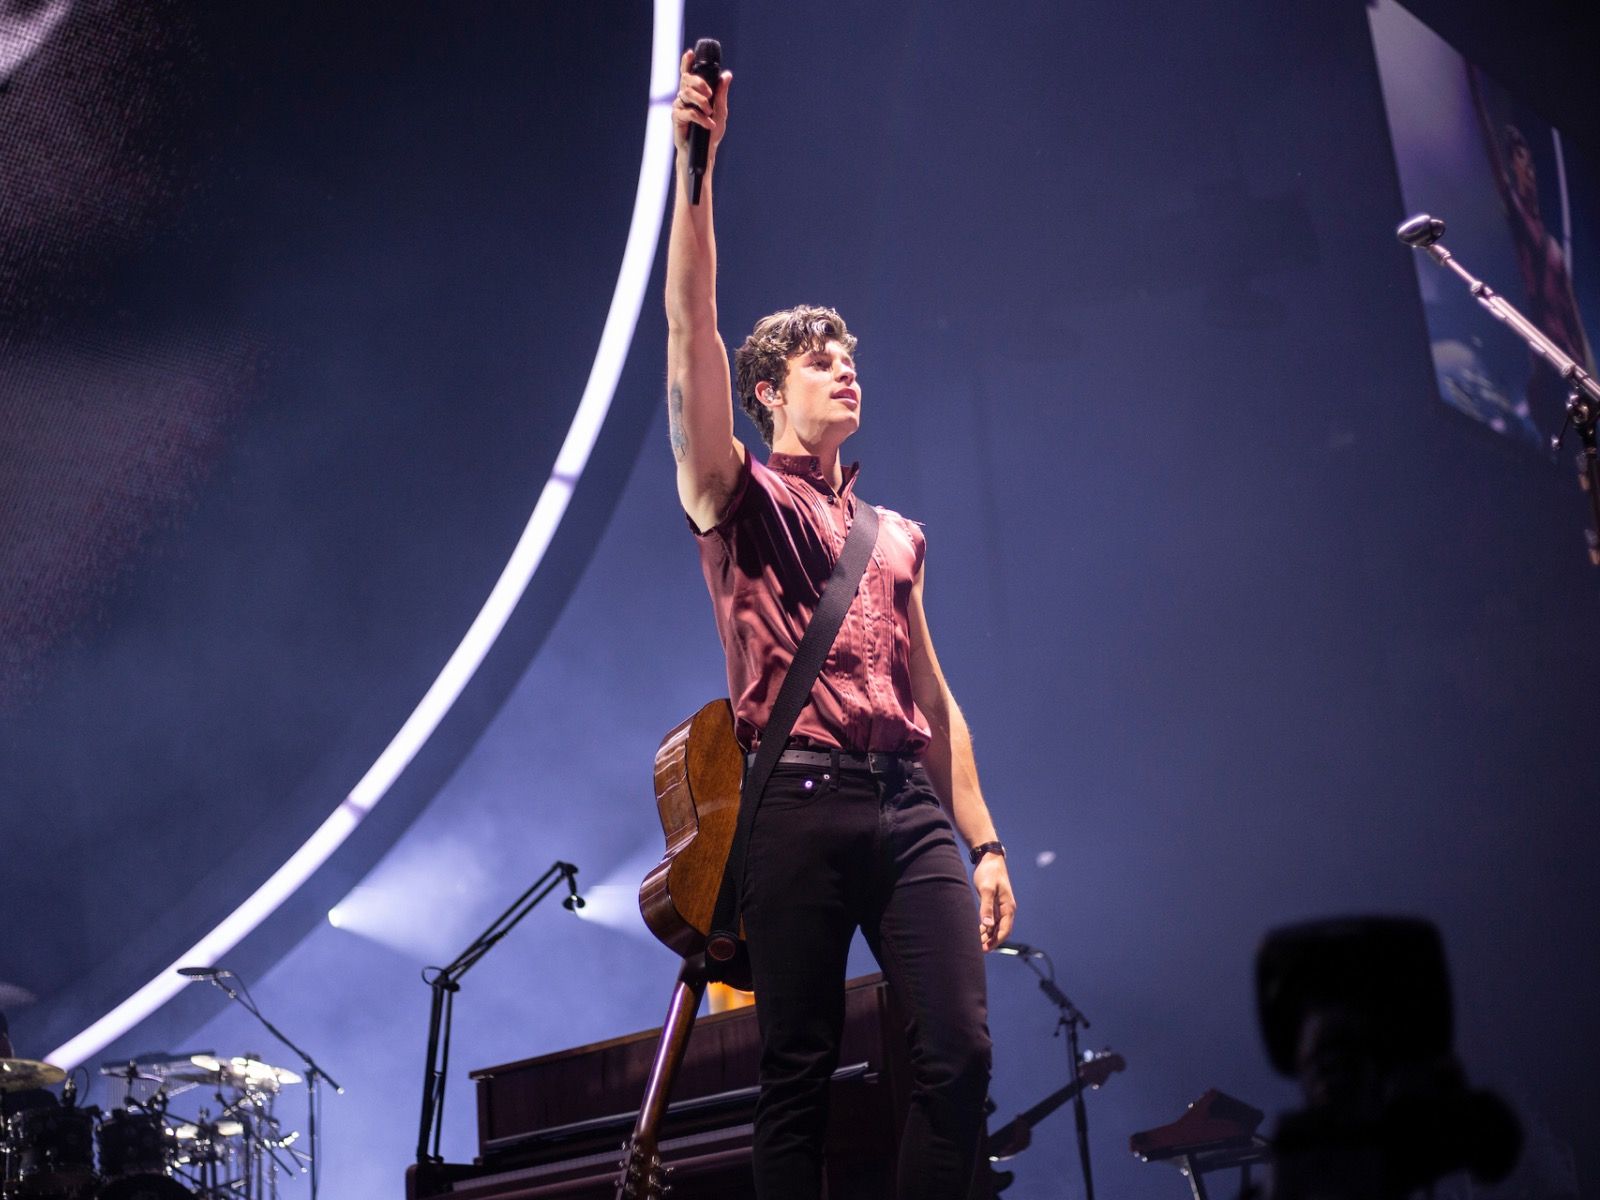 reasons why you shouldn't have missed Shawn Mendes' concert at Fiserv Forum